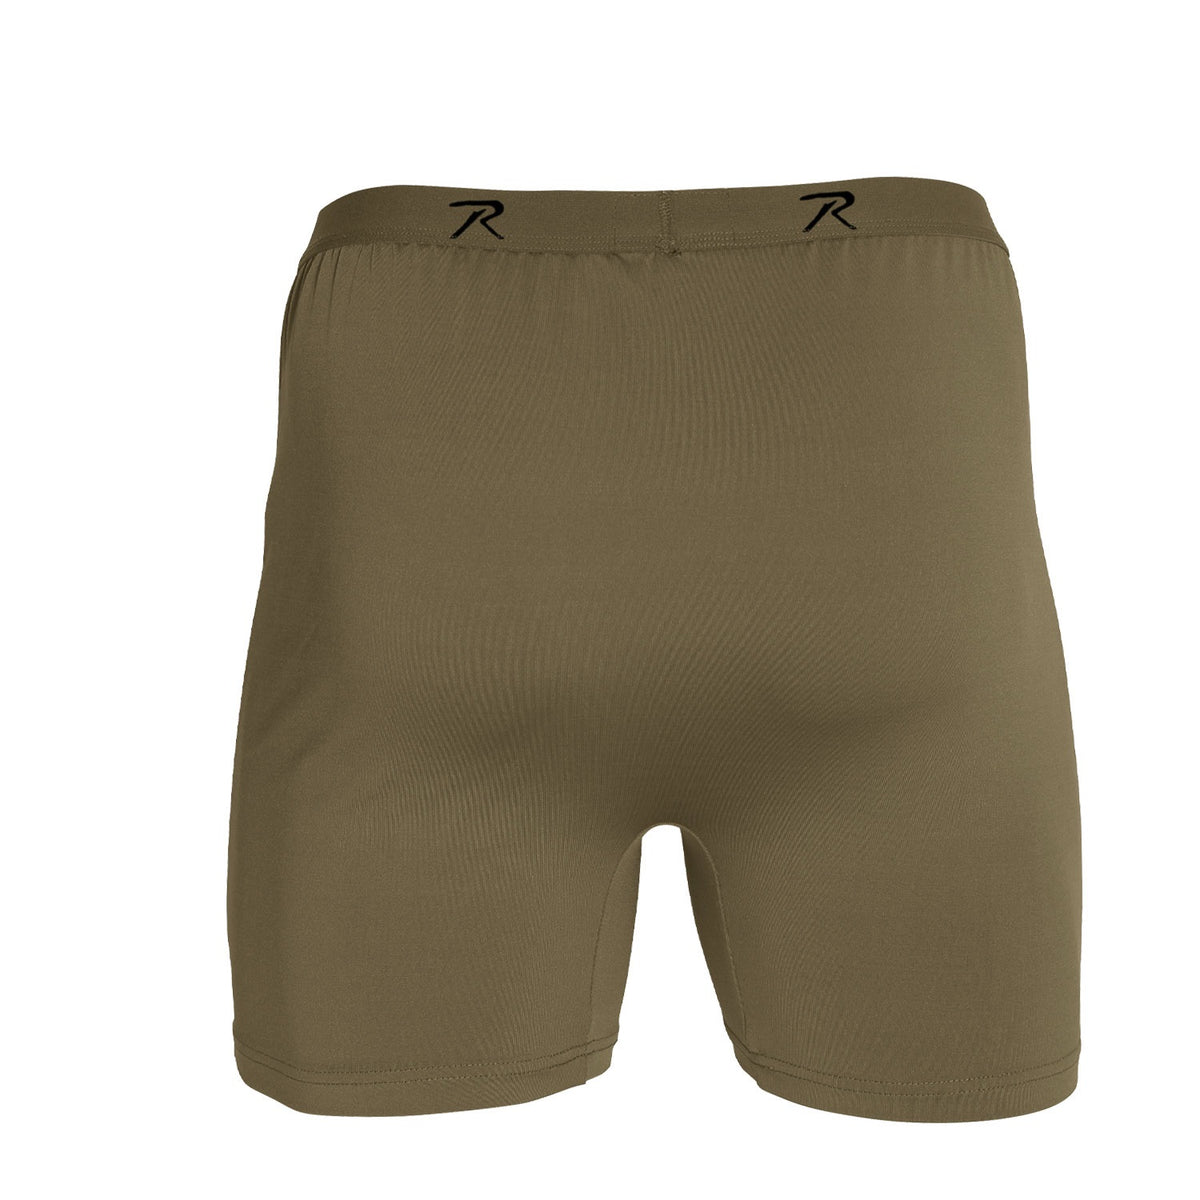 Rothco AR 670-1 Coyote Brown Moisture Wicking Performance Boxer Shorts